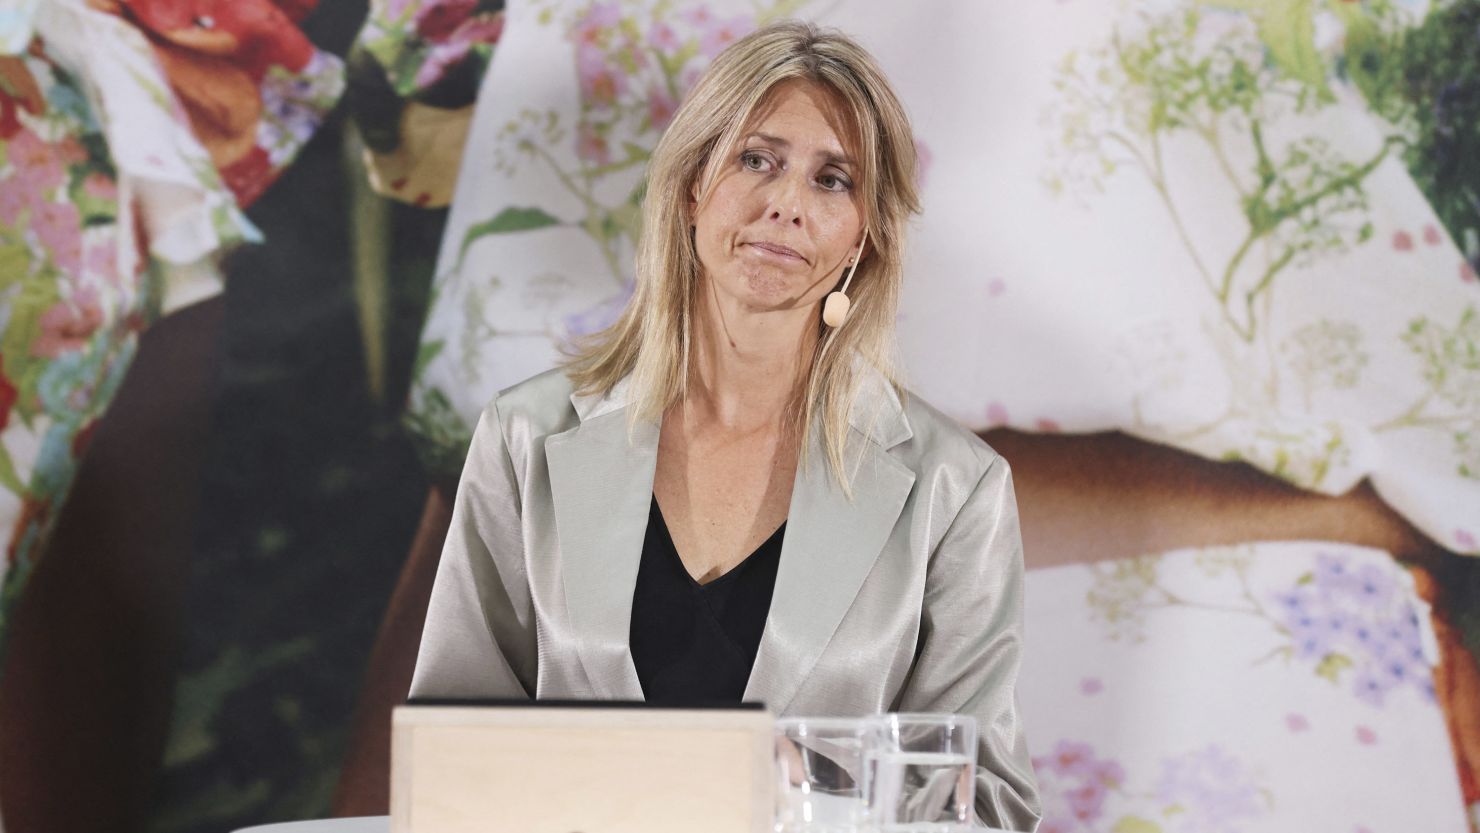 Helena Helmersson, then-CEO of H&M, at a press conference in June 2023 in Stockholm